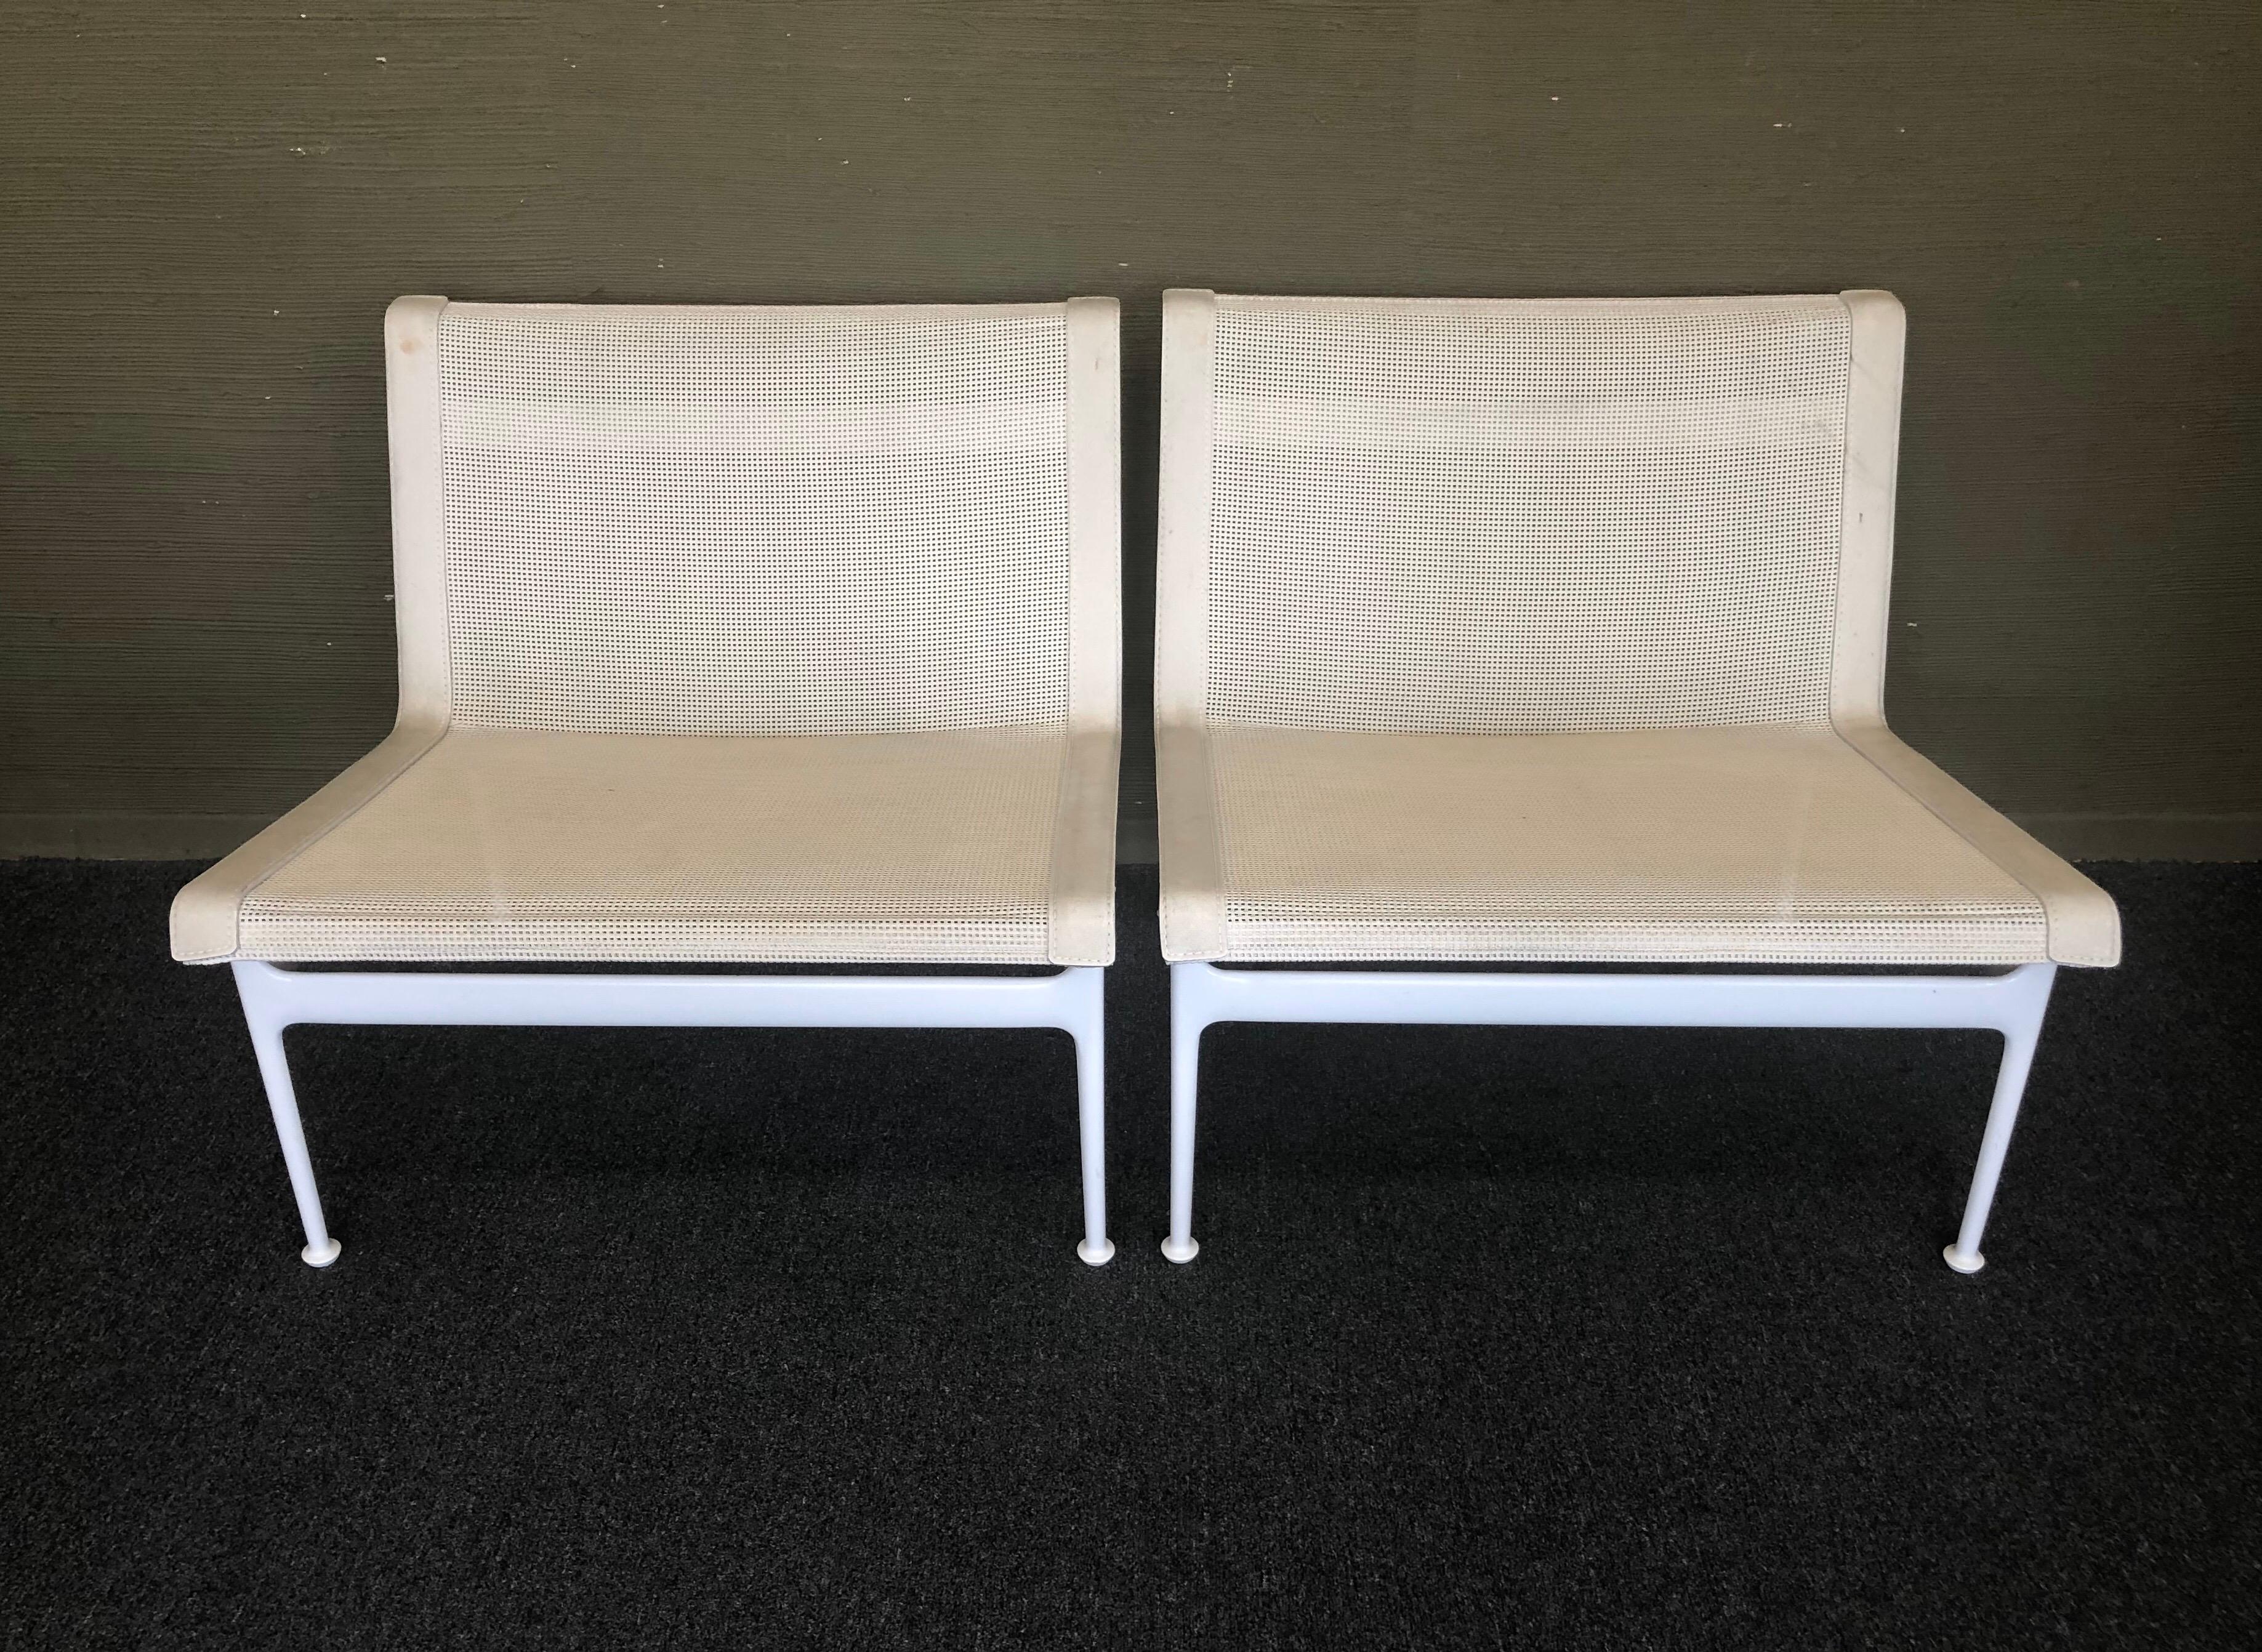 Handsome pair of armless lounge chairs with designed by Richard Schultz as part of his 1966 Collection for Knoll, circa 1990s. 

Craving furniture that could stand up to the salty environment of her seaside home in Florida, Florence Knoll called